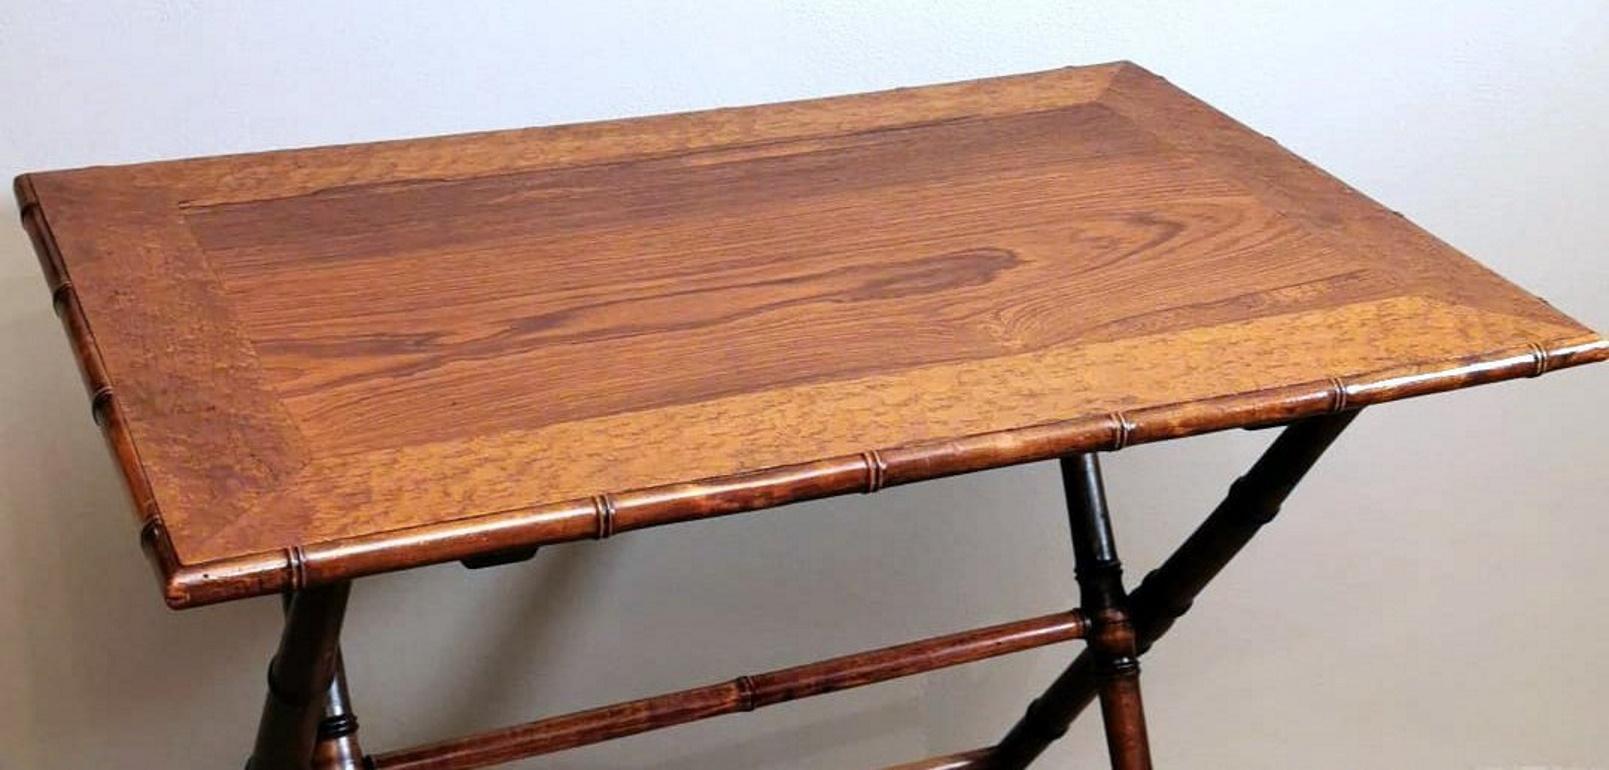 Polished Art Deco Style Folding French Table in Walnut, Walnut Briar and Faux Bamboo